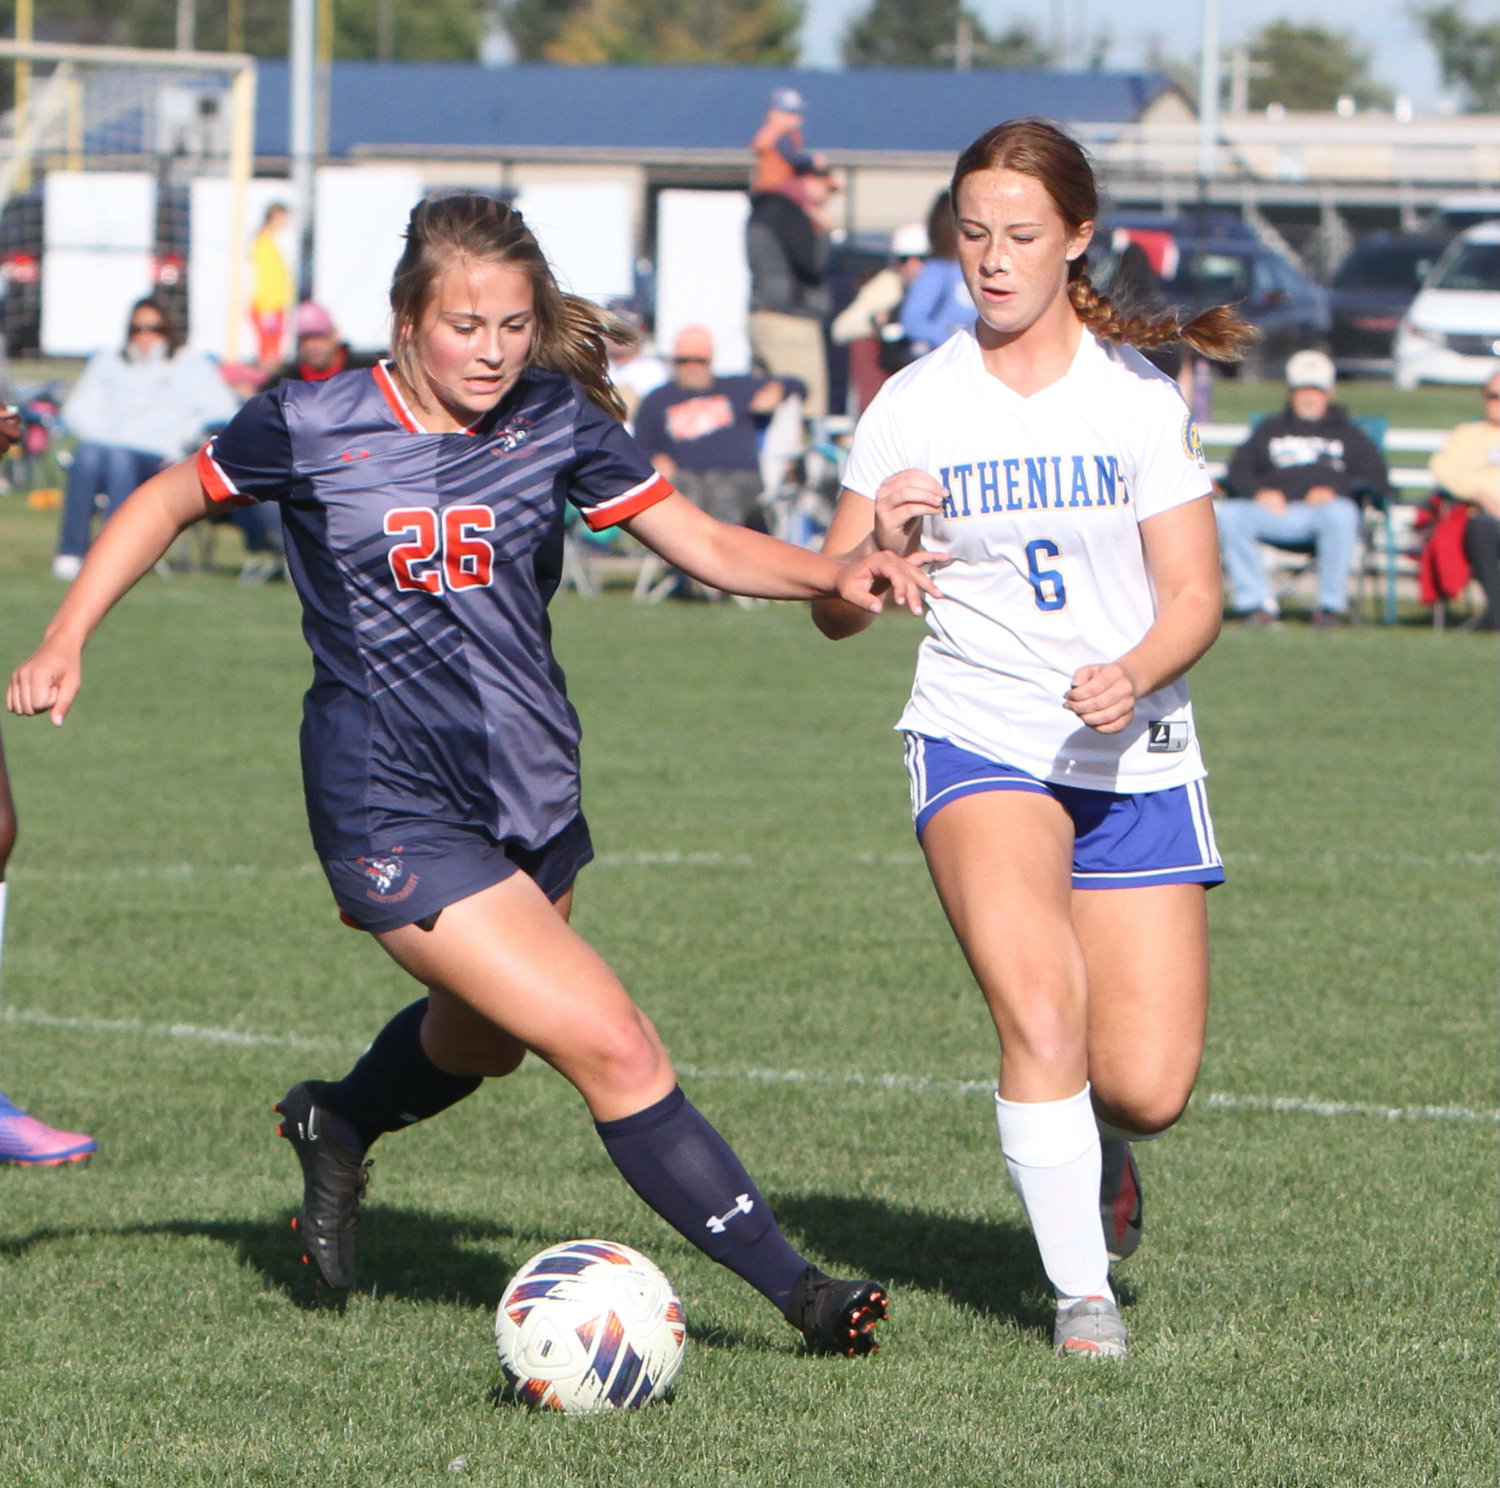 Celeste Moore of Crawfordsville and Kennady Sanders of North Montgomery battle for possession.